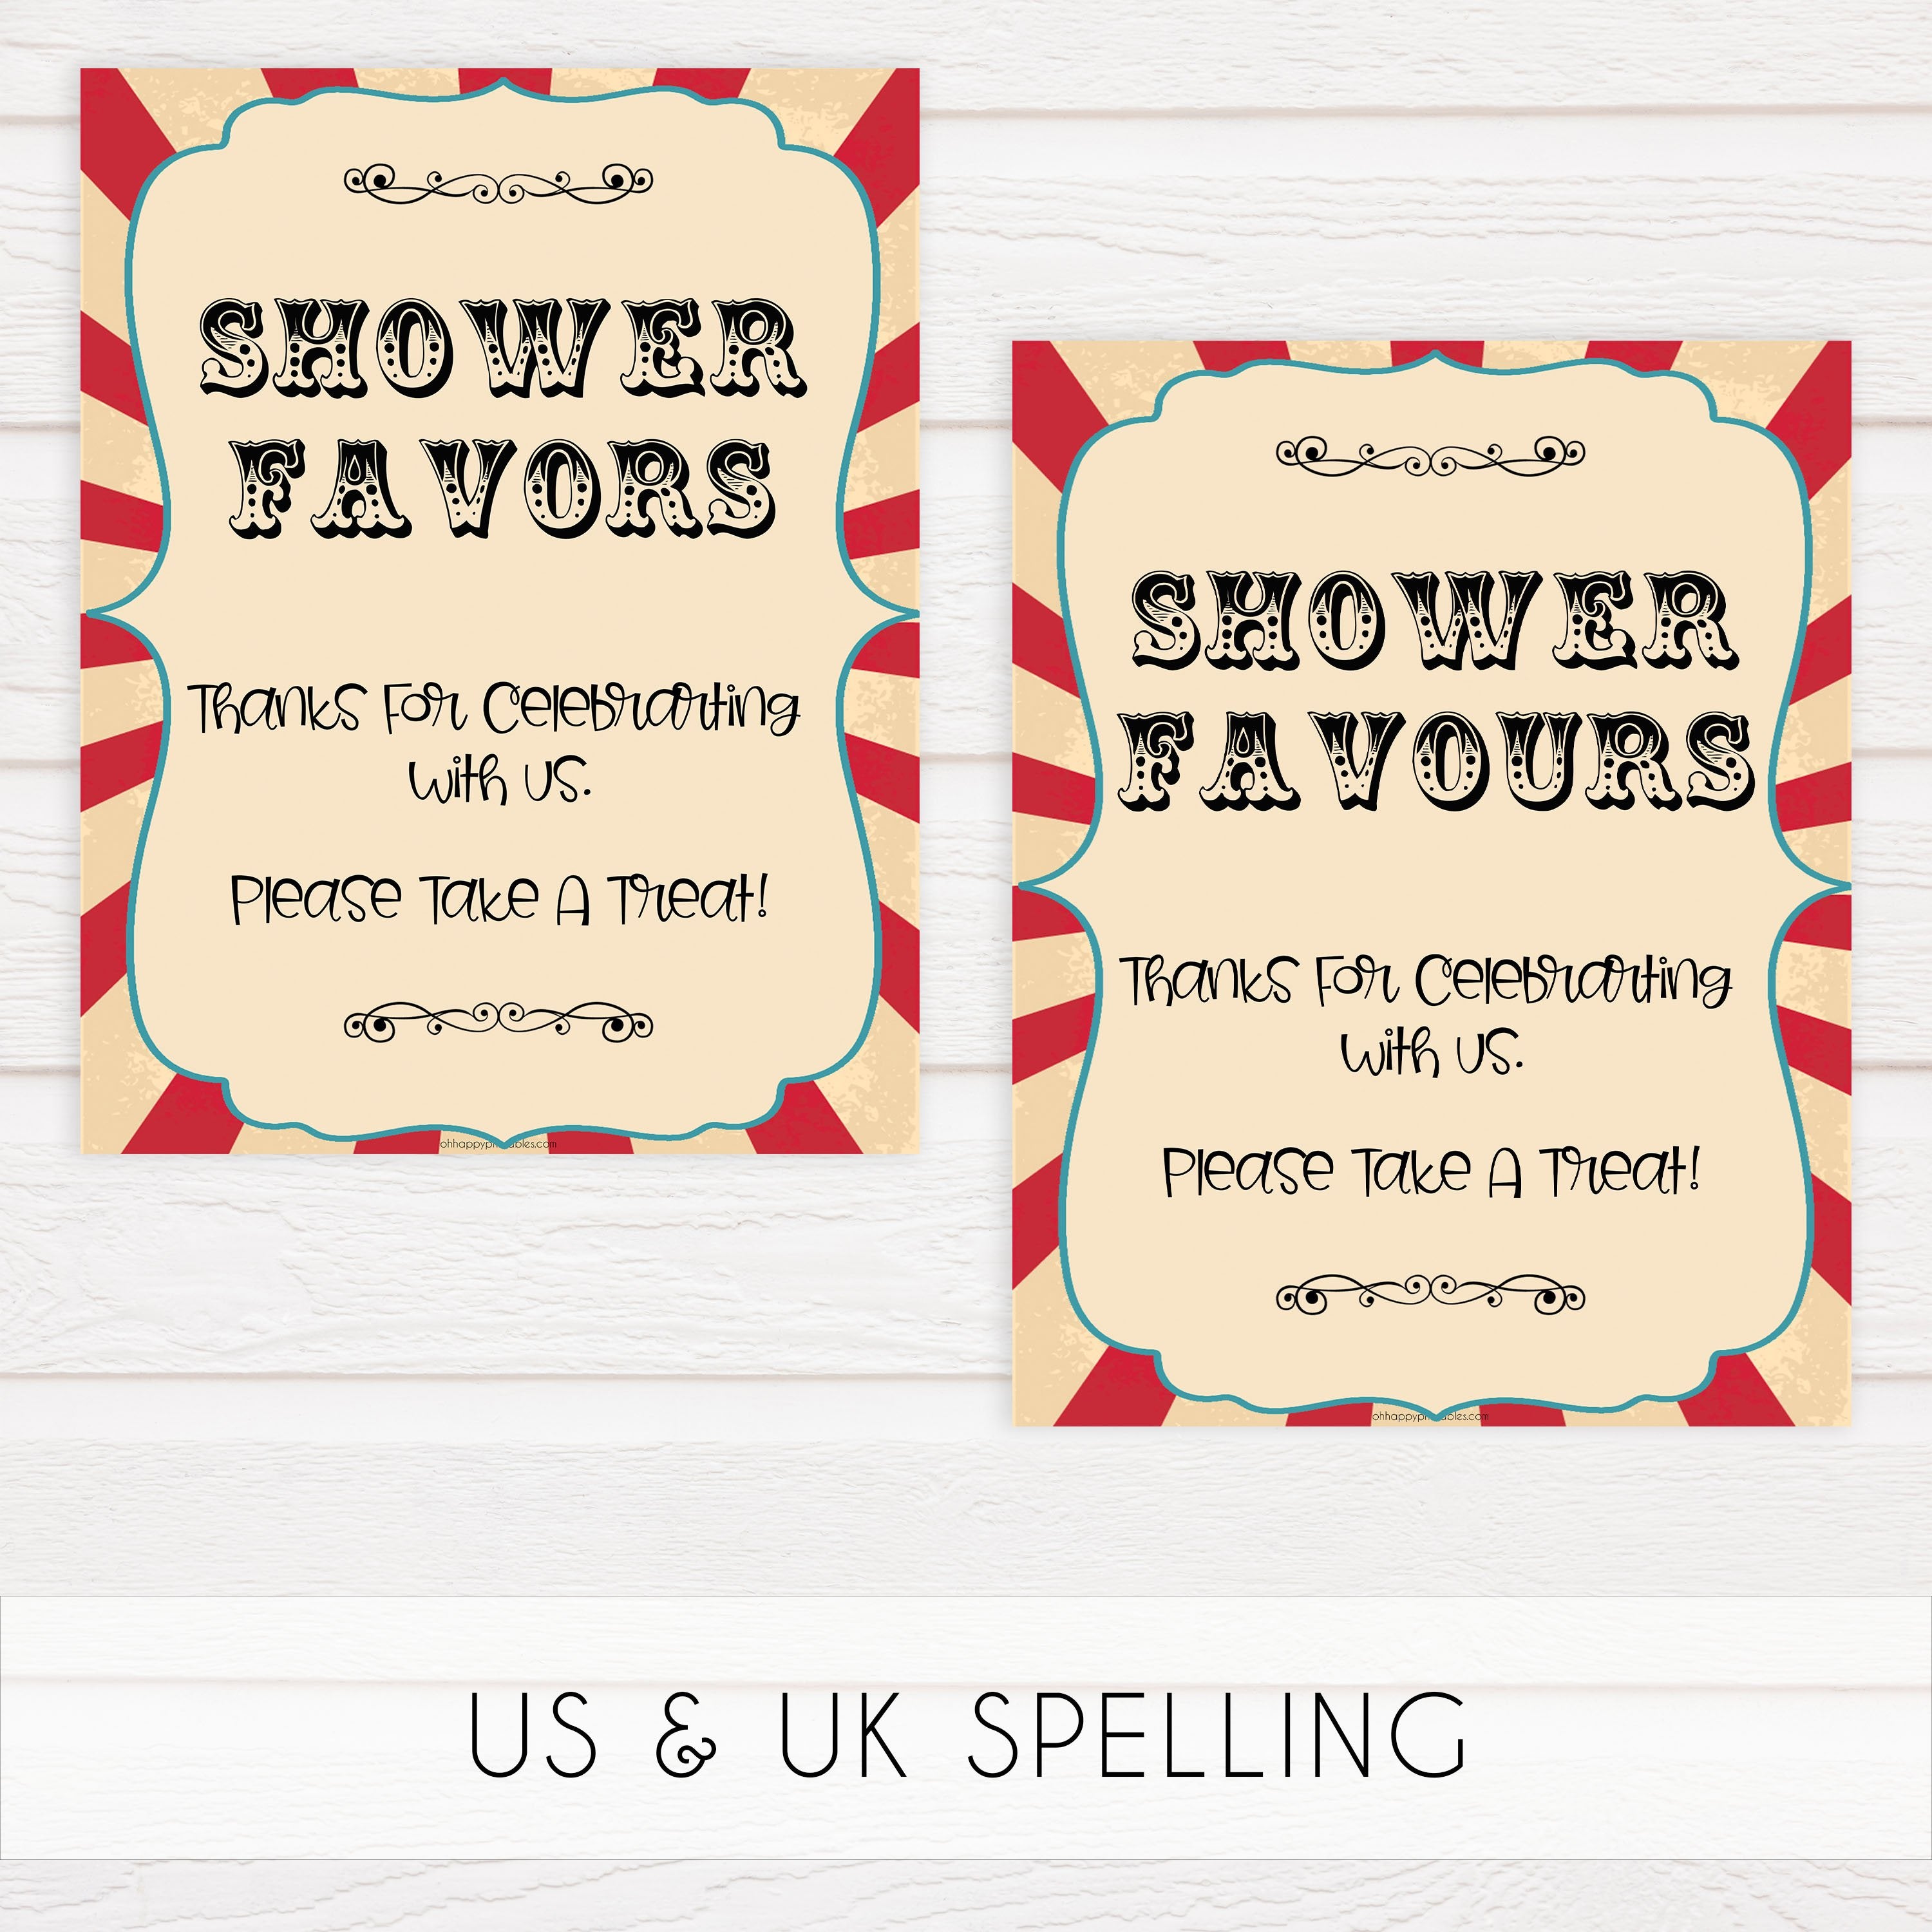 8 baby shower table signs, carnival baby decor, Circus baby decor, printable baby table signs, printable baby decor, carnival table signs, fun baby signs, circus fun baby table signs